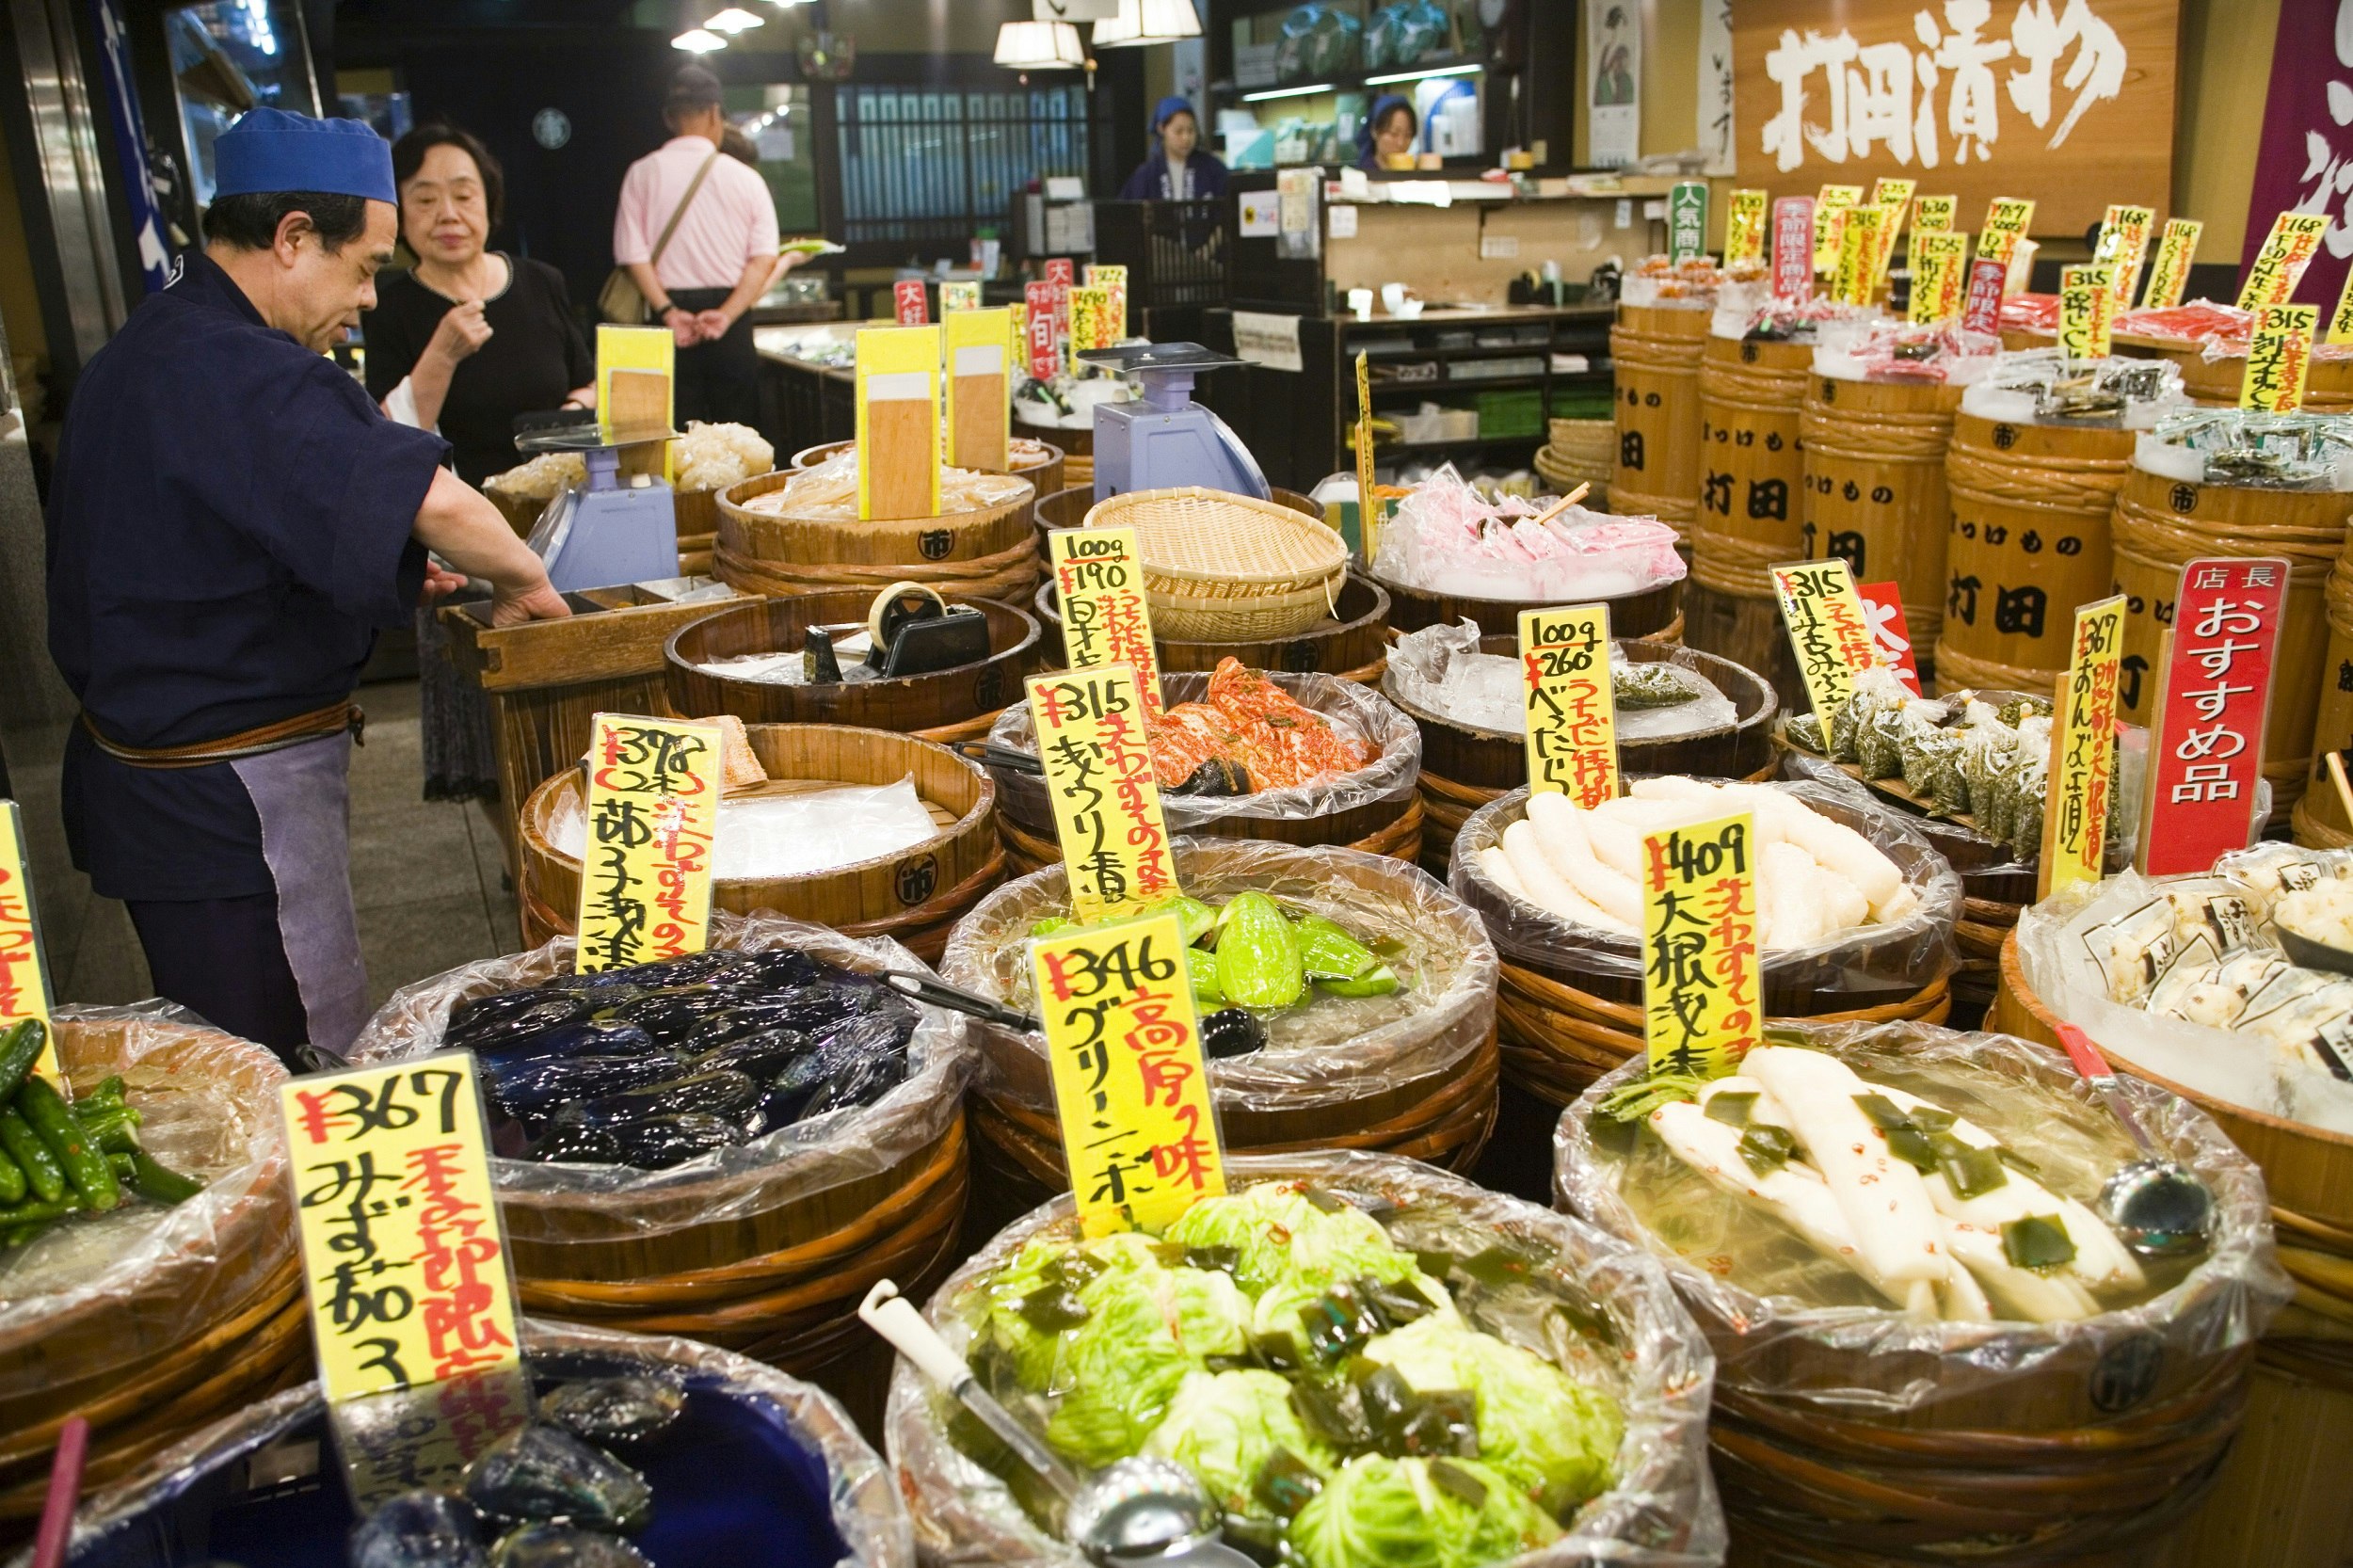 Numerous wooden tubs are filled with vegetables at the Nishiki Market; yellow labels with black-and-red Japanese writing denote the cost and contents of each.